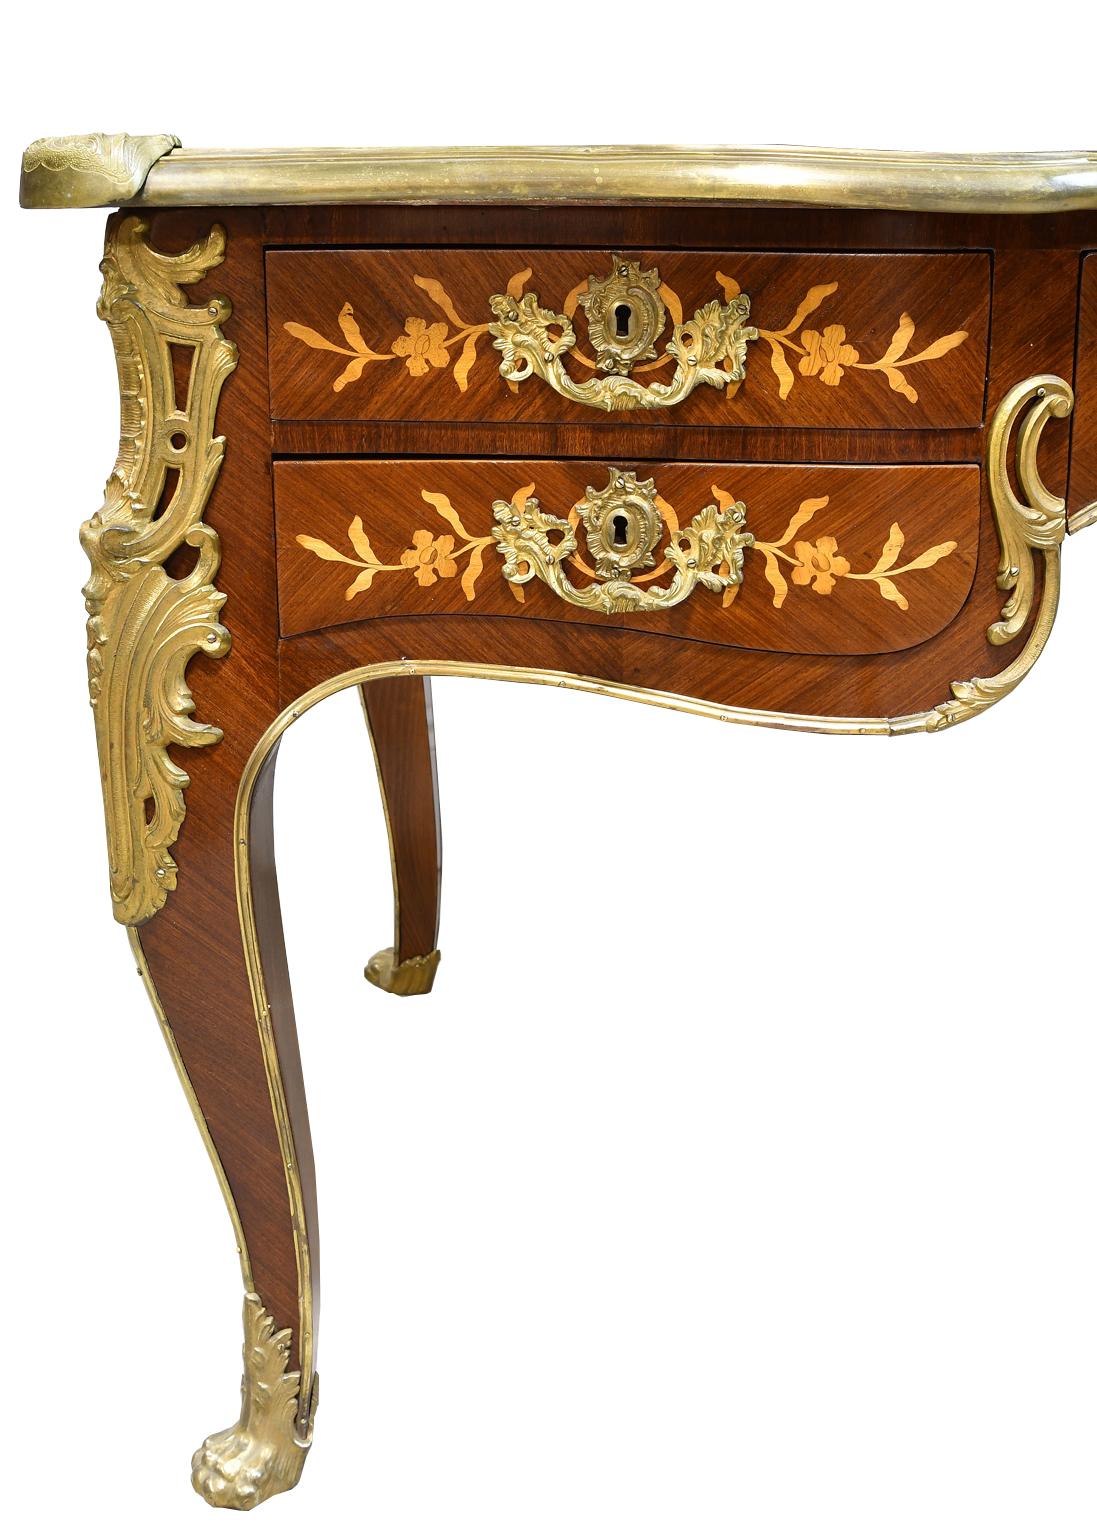 Brass French Bureau Plat with Parquetry, Marquetry and Ormolu, circa 1910